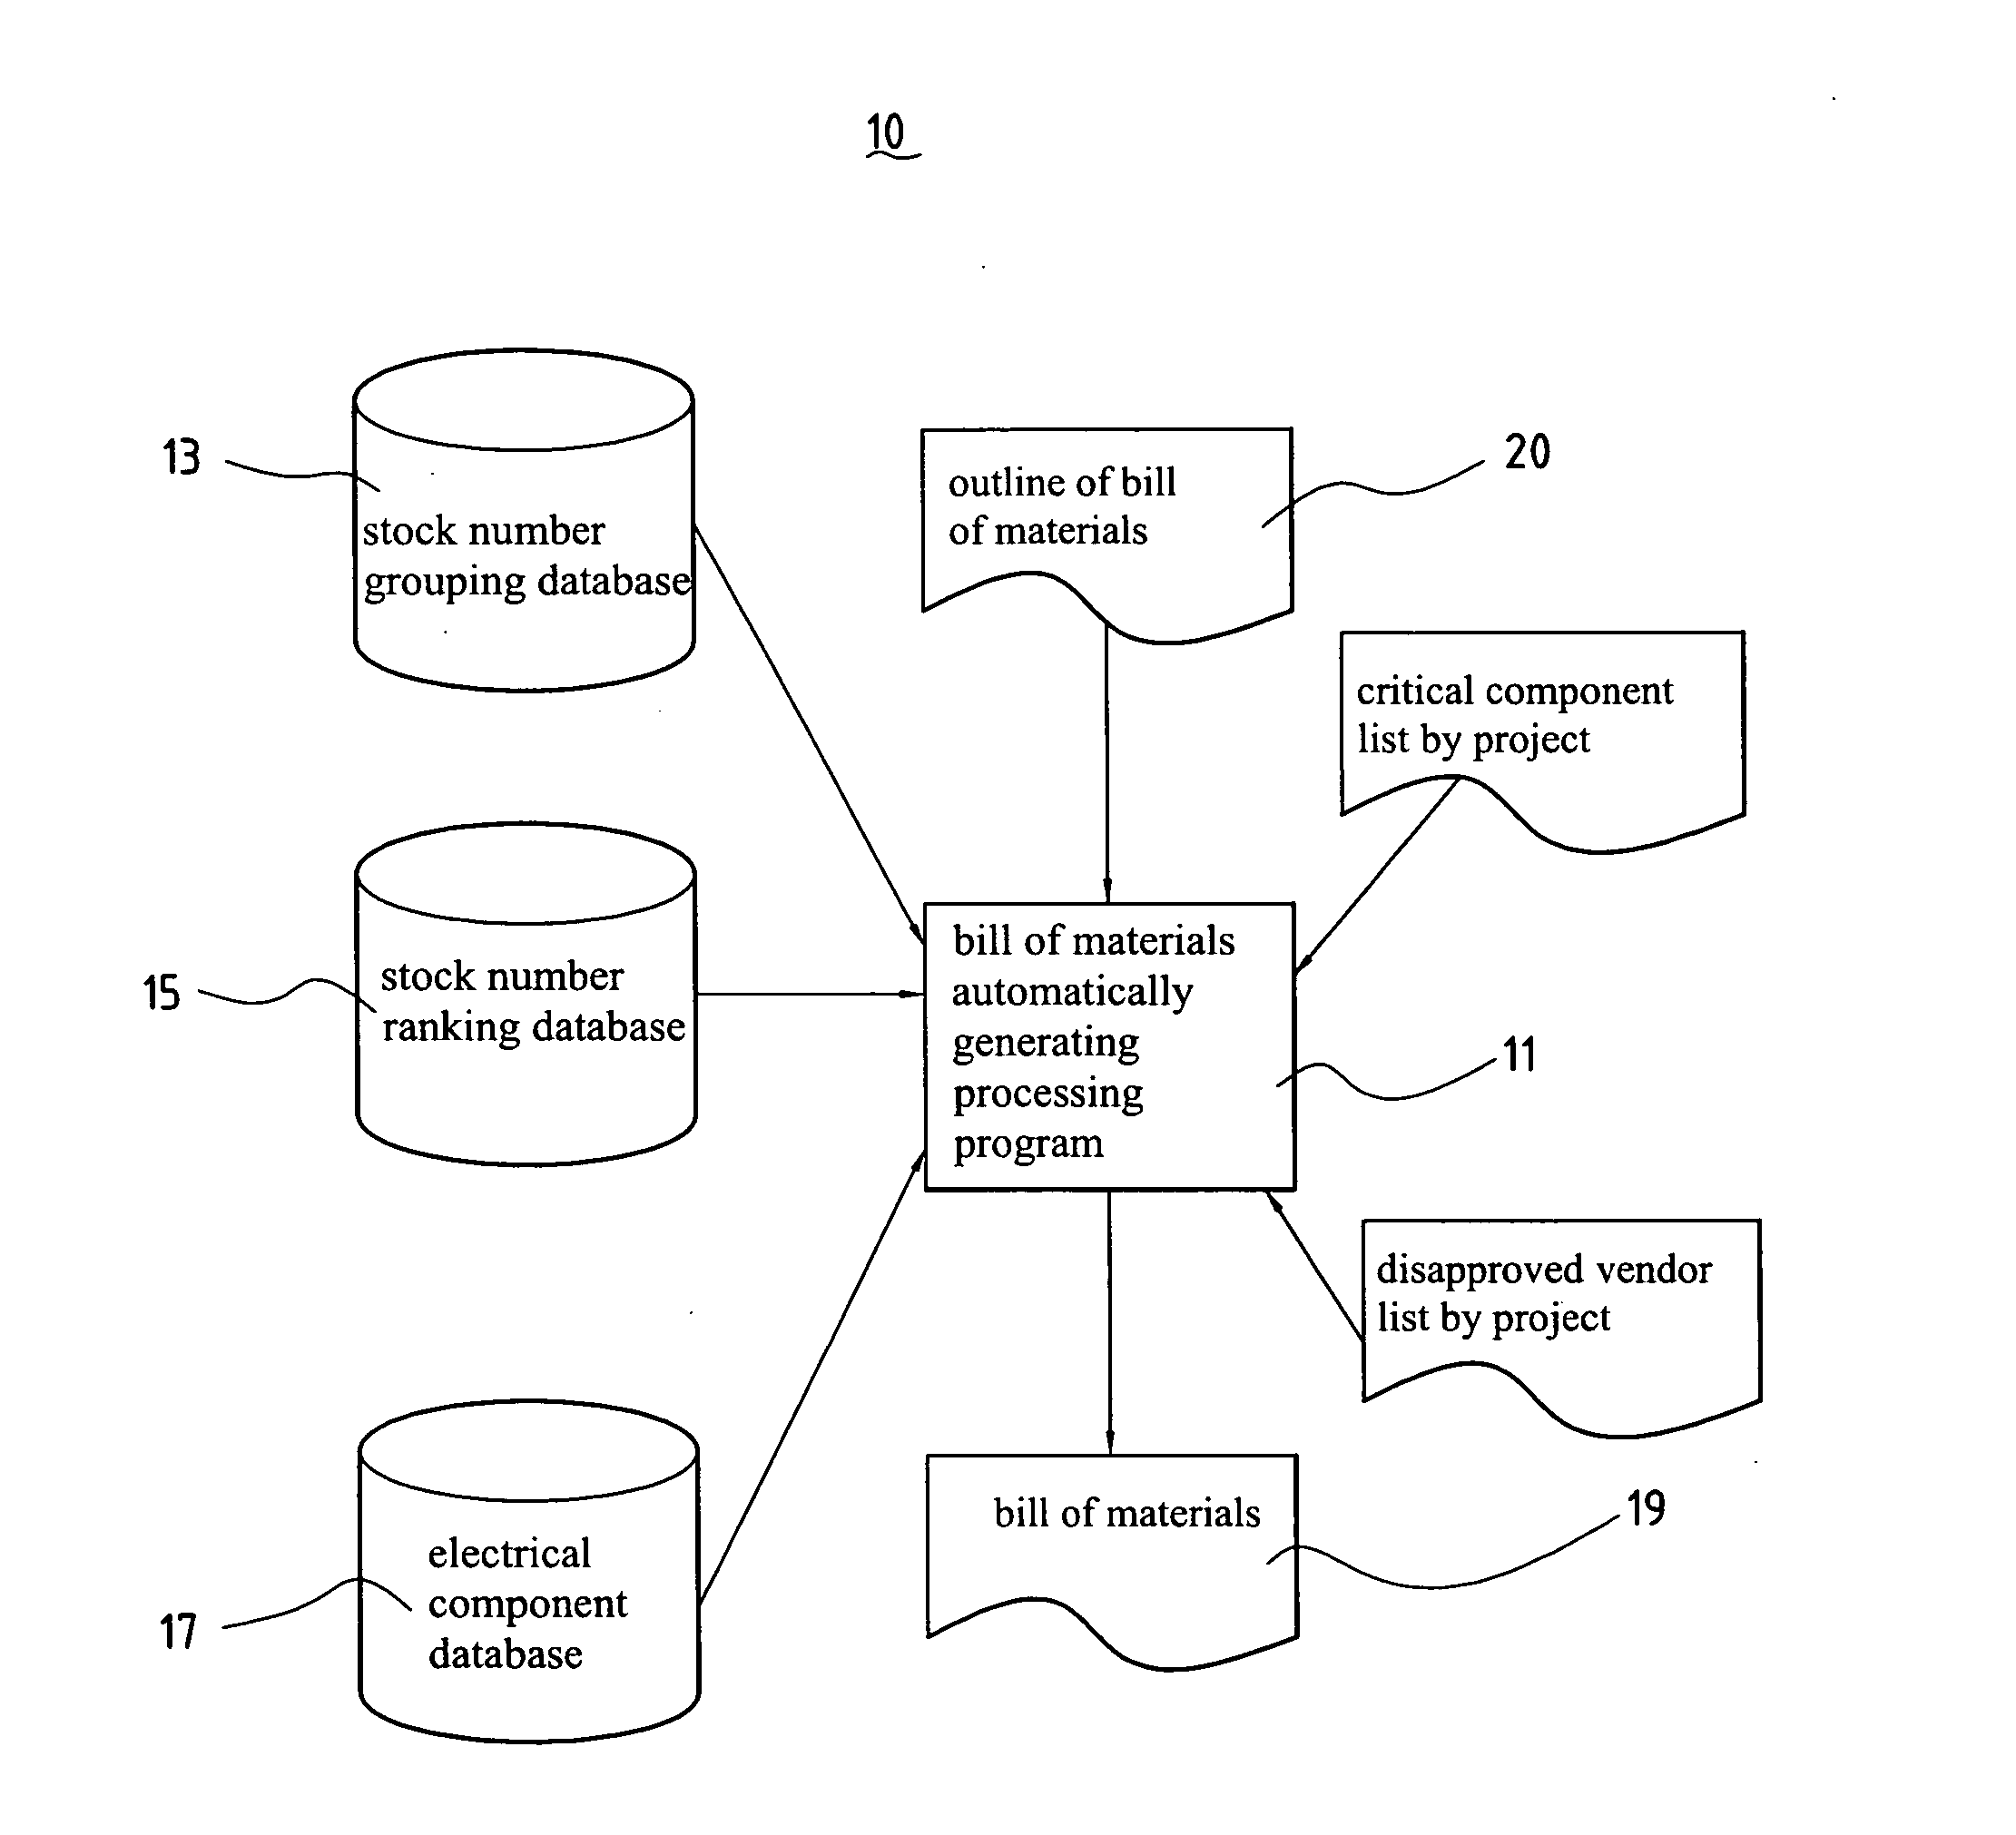 Generating system for automatically generating the bill of materials for electrical products